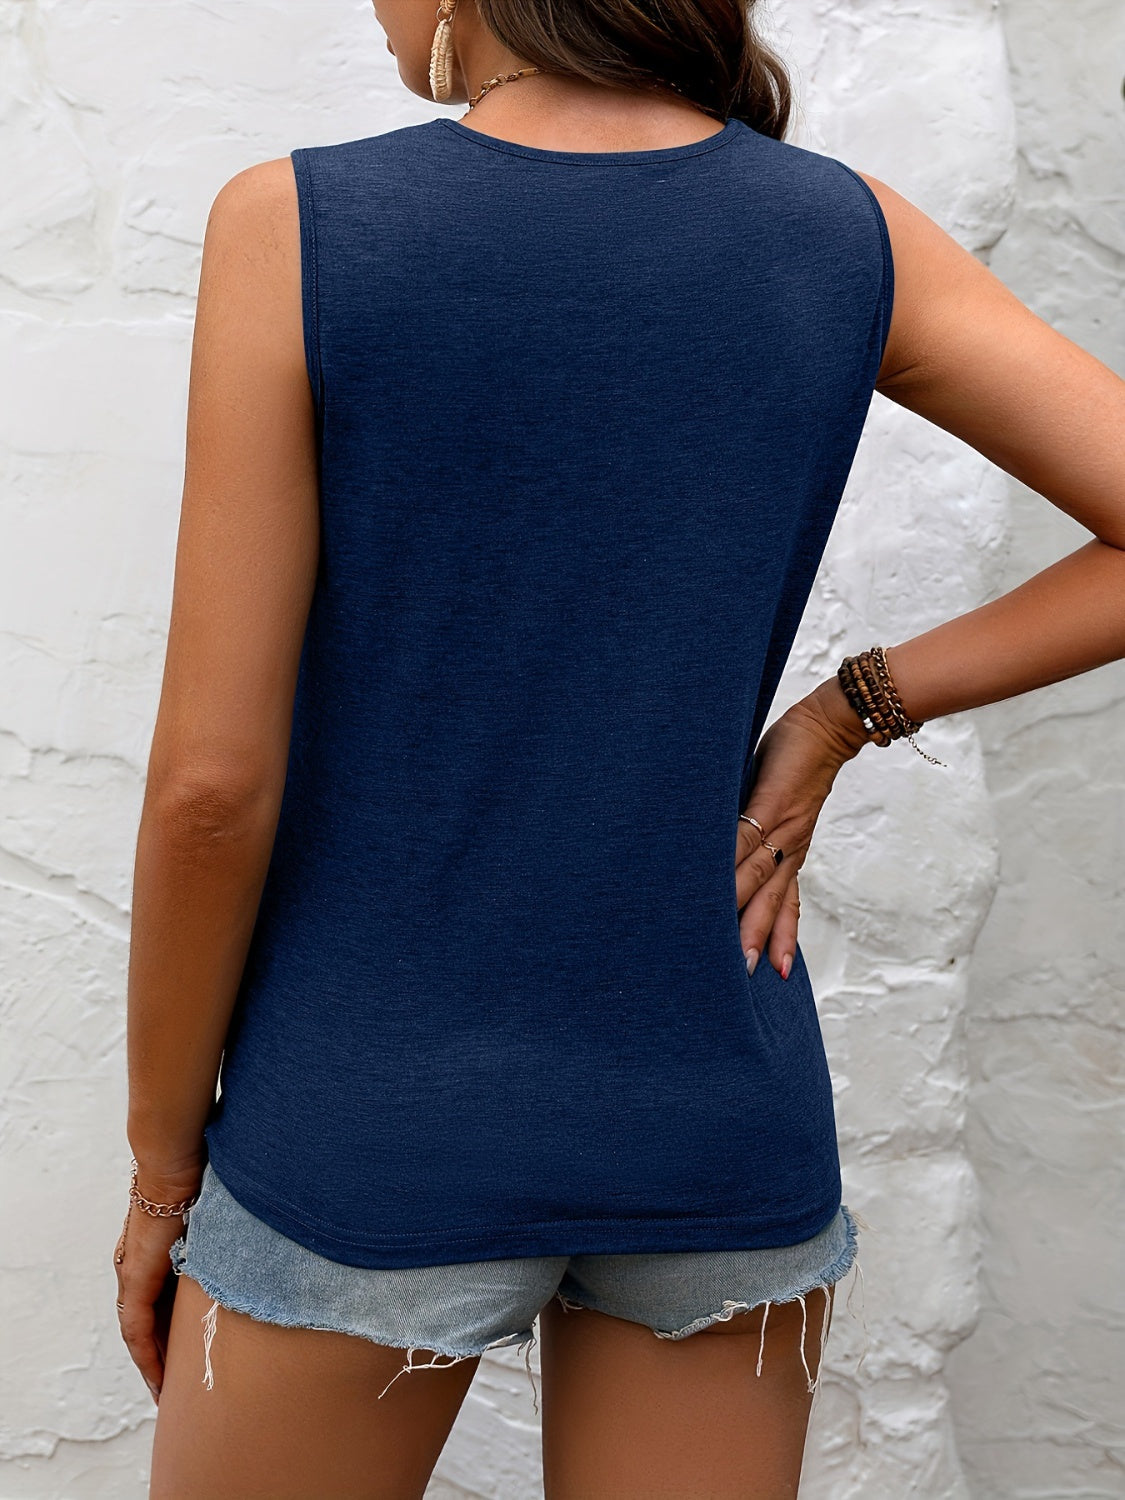 Stylish dark blue sleeveless top with delicate black lace neckline, paired with distressed denim shorts for a chic summer look